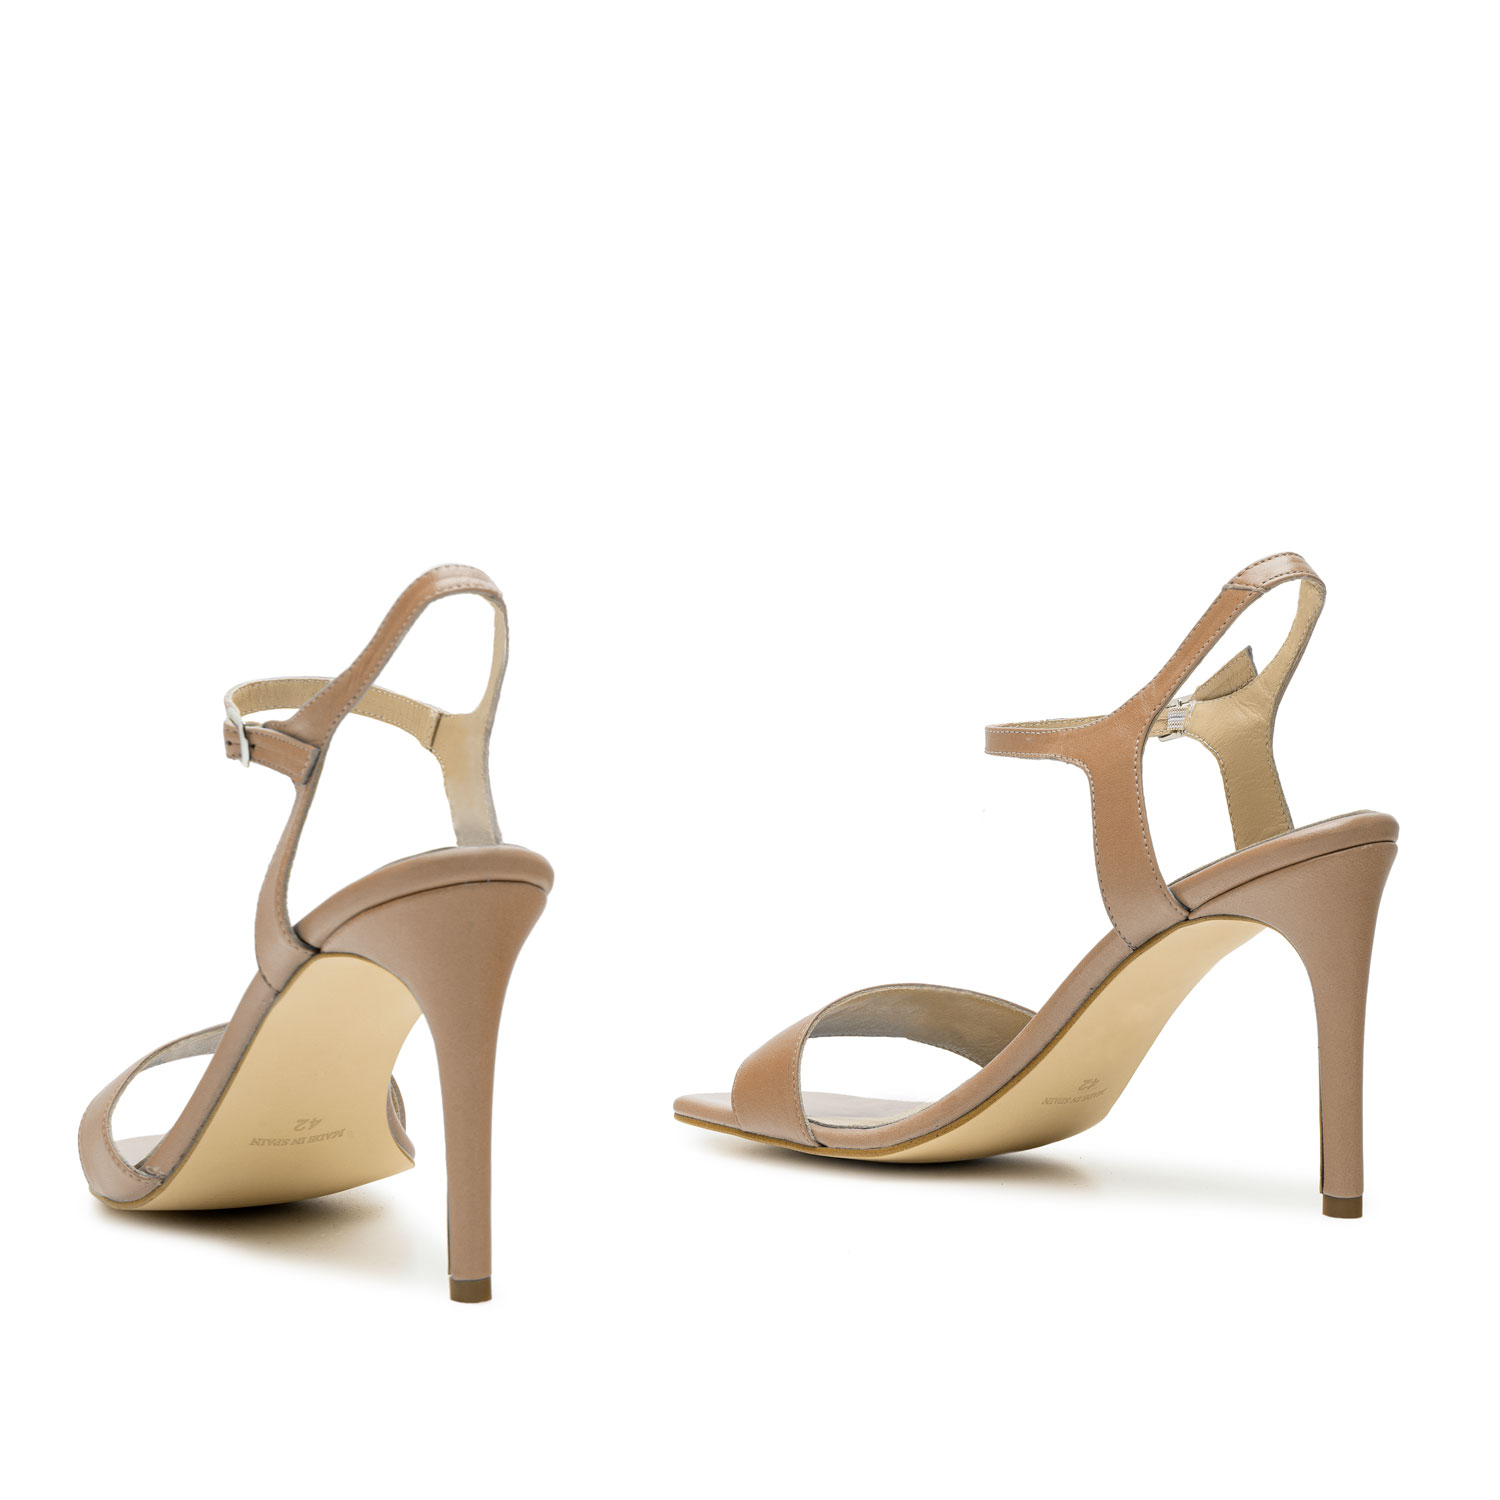 Ankle Stiletto Sandals in Nude Leather 